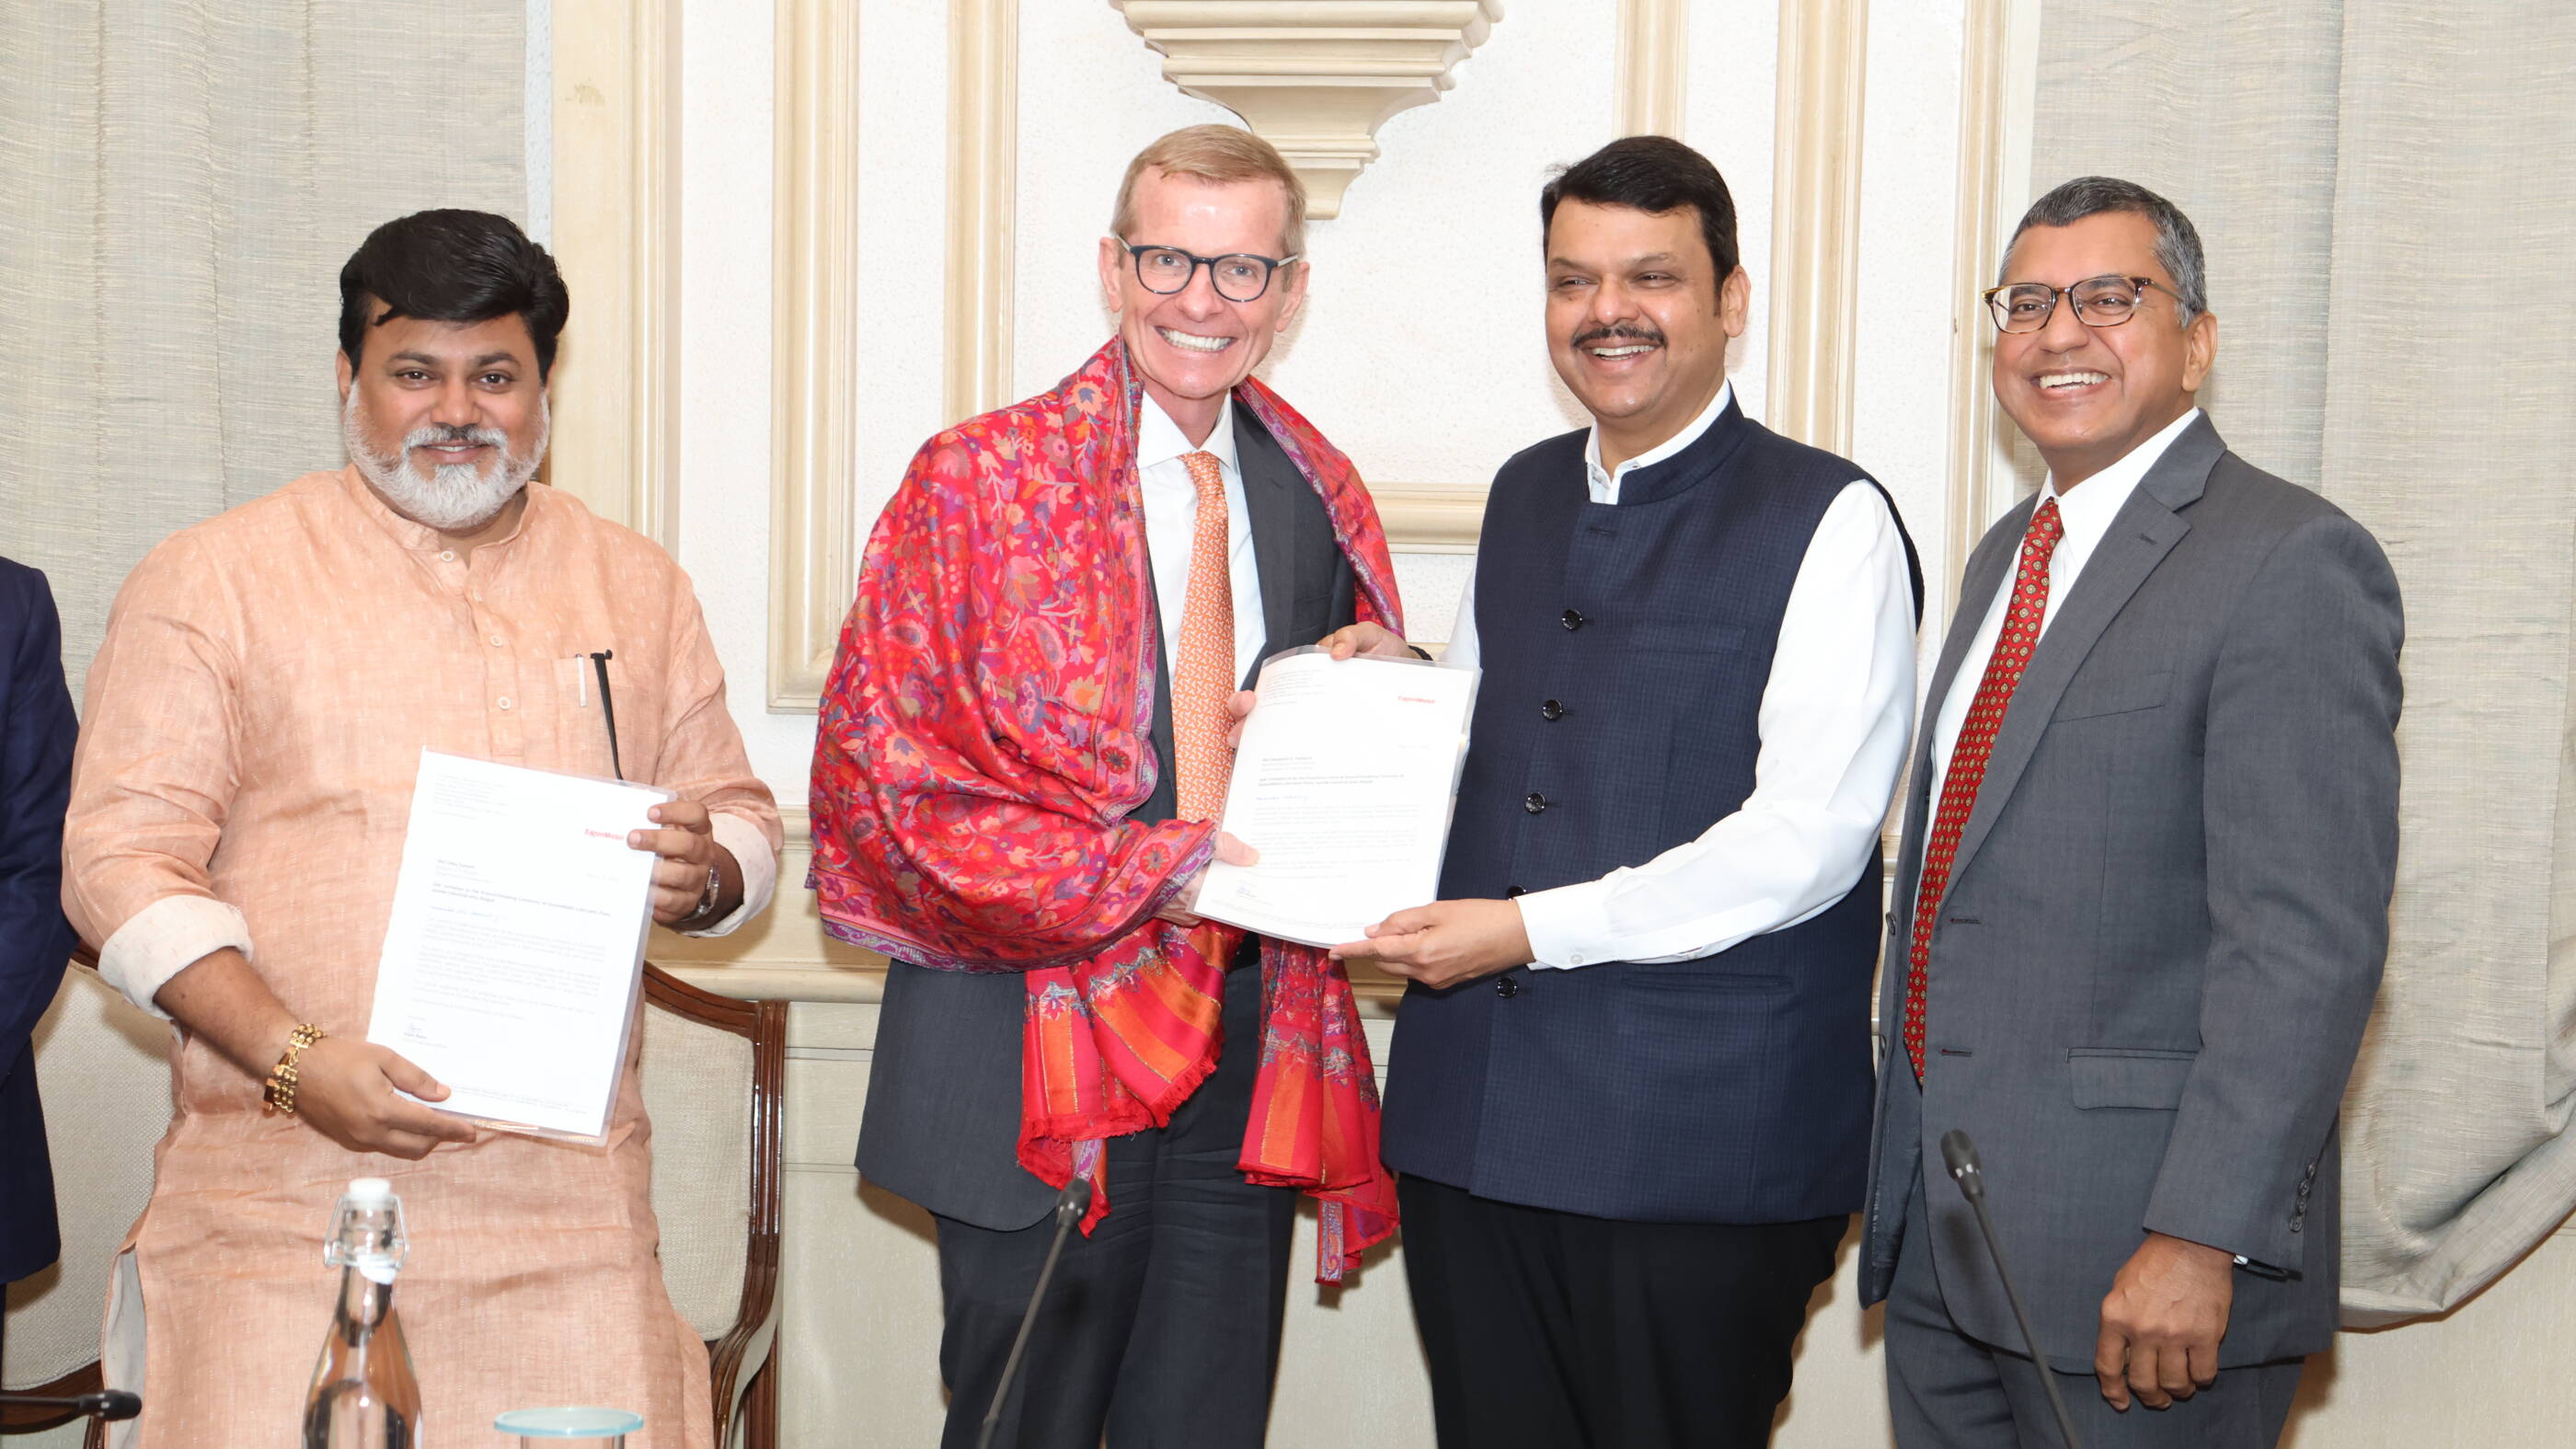 (From left to right) Industry Minister of Maharashtra Uday Samant, India LCM Monte Dobson, Deputy Chief Minister of Maharashtra Devendra Fadnavis and ExxonMobil Lubricants Pvt. Ltd CEO Vipin Rana